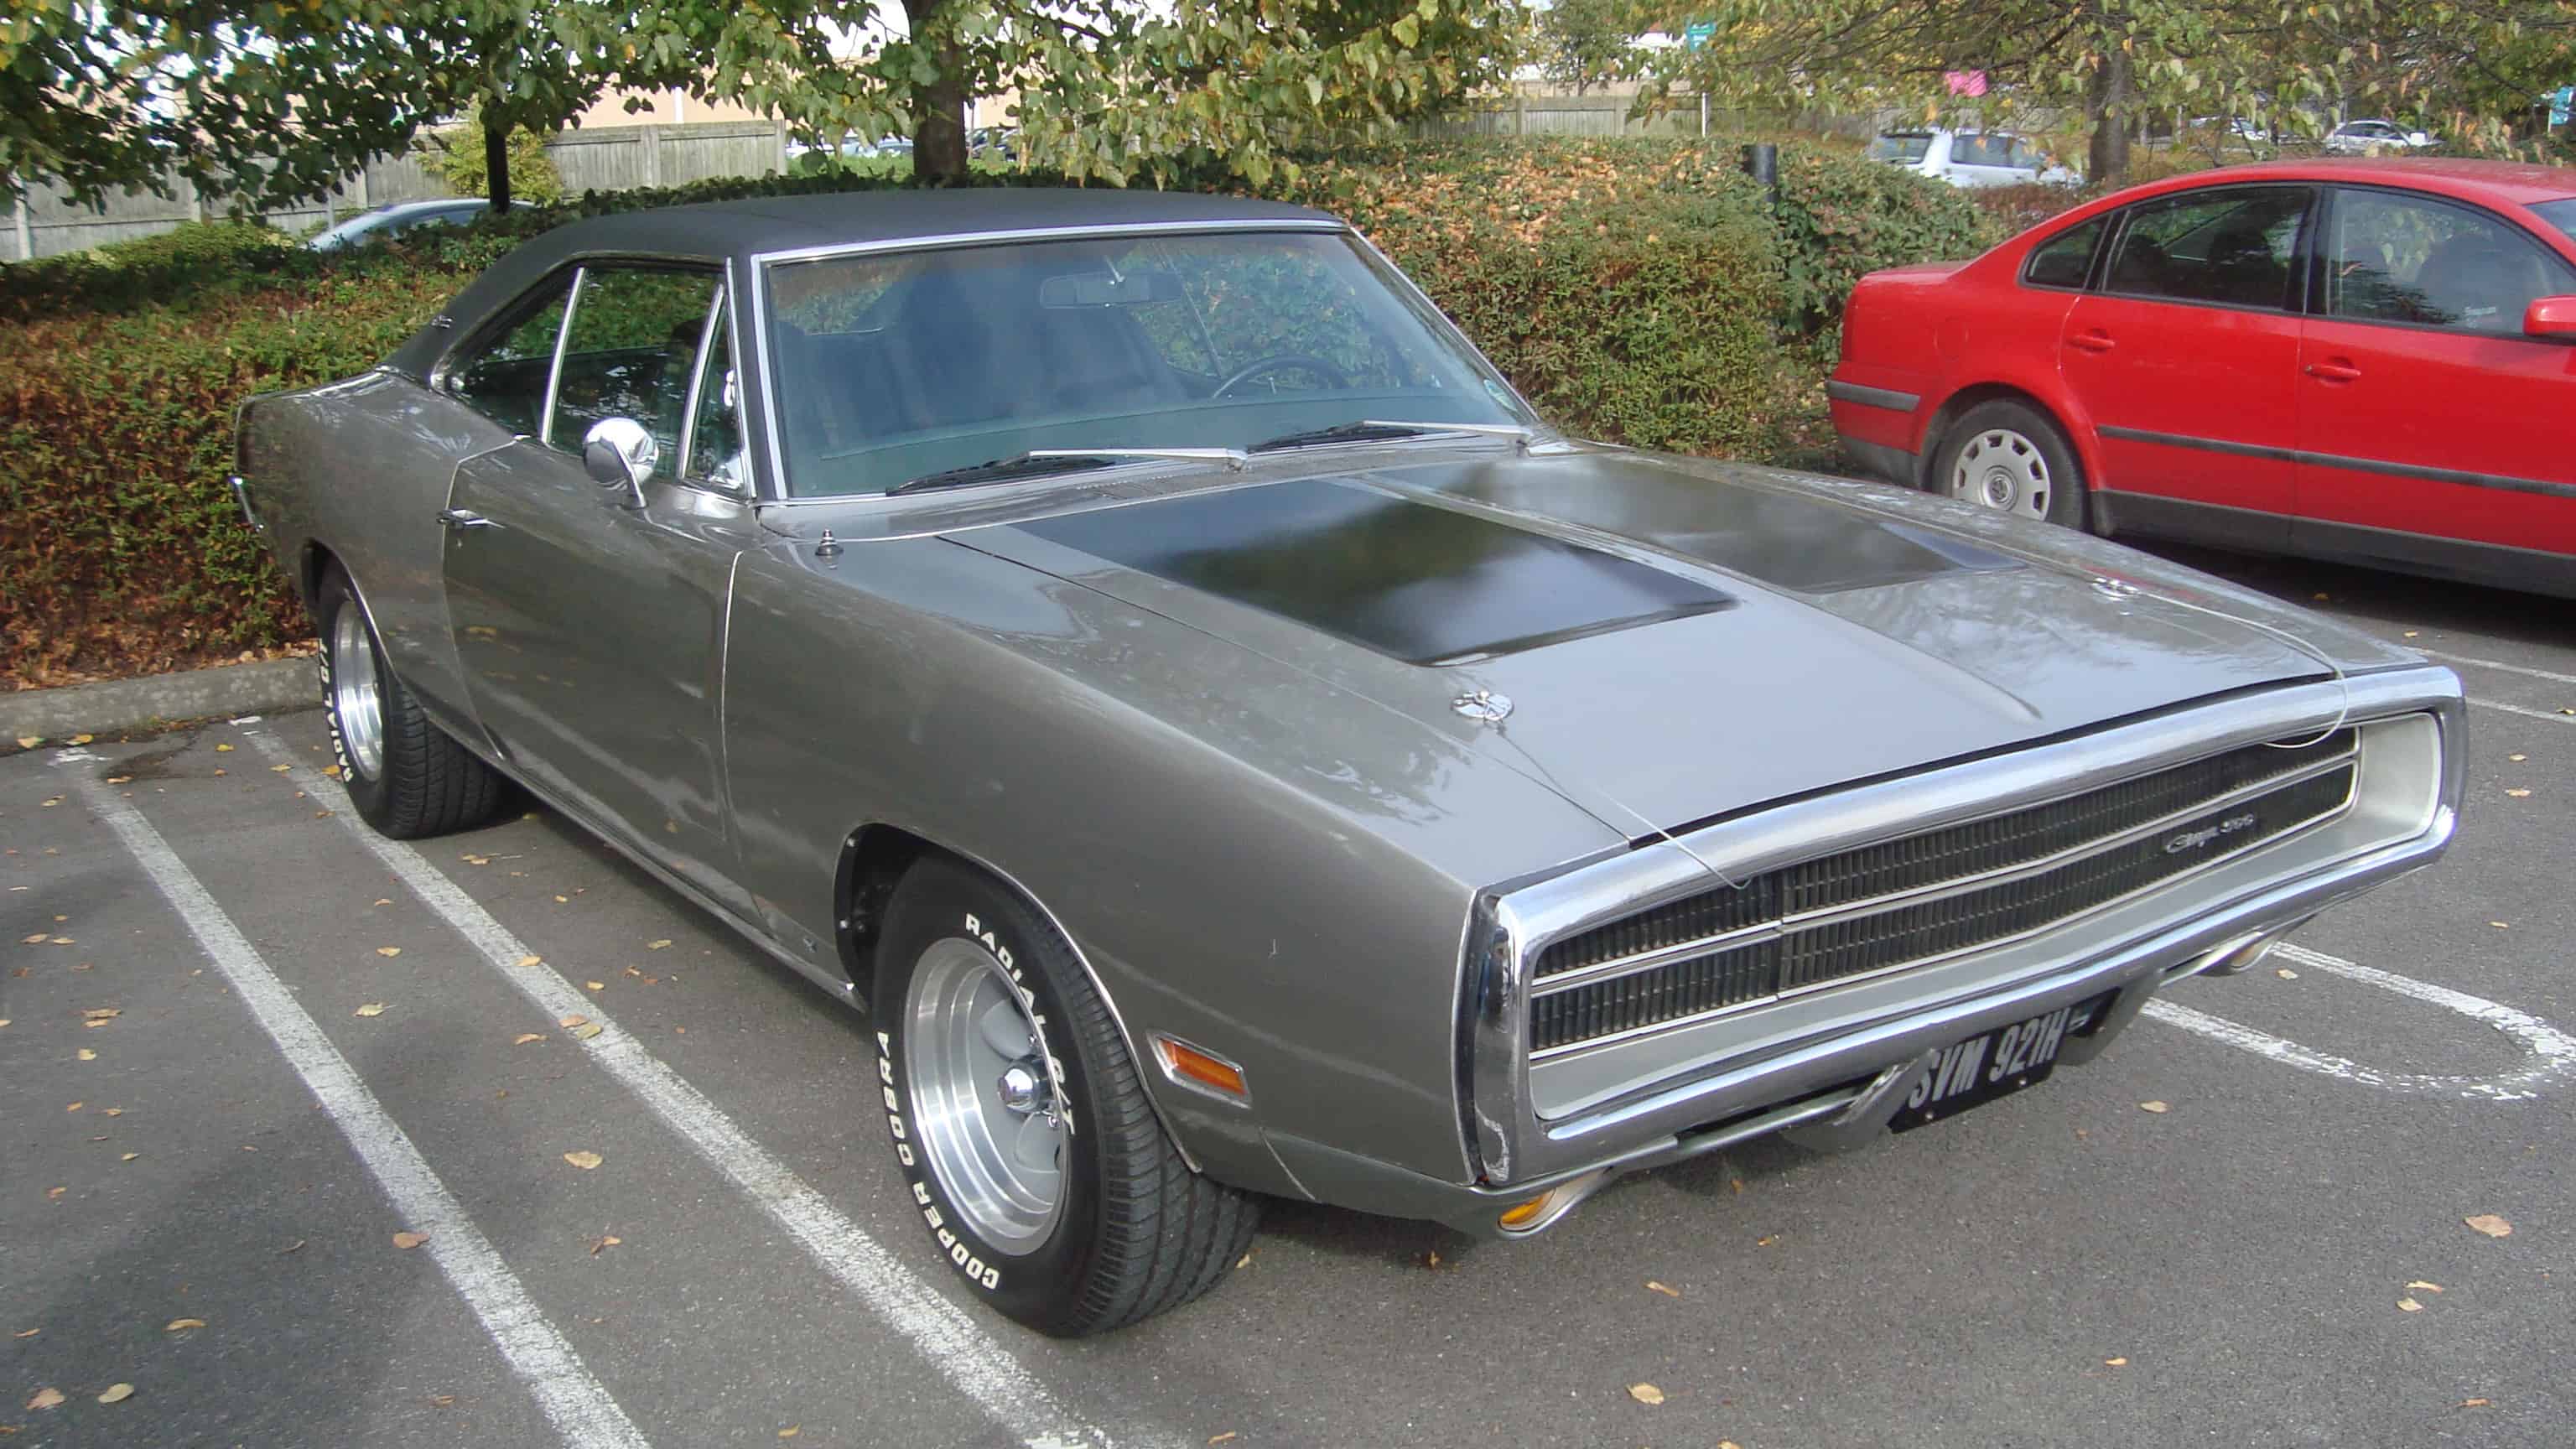 DOMINIC TORETTO’S 1970S DODGE CHARGER FRONT